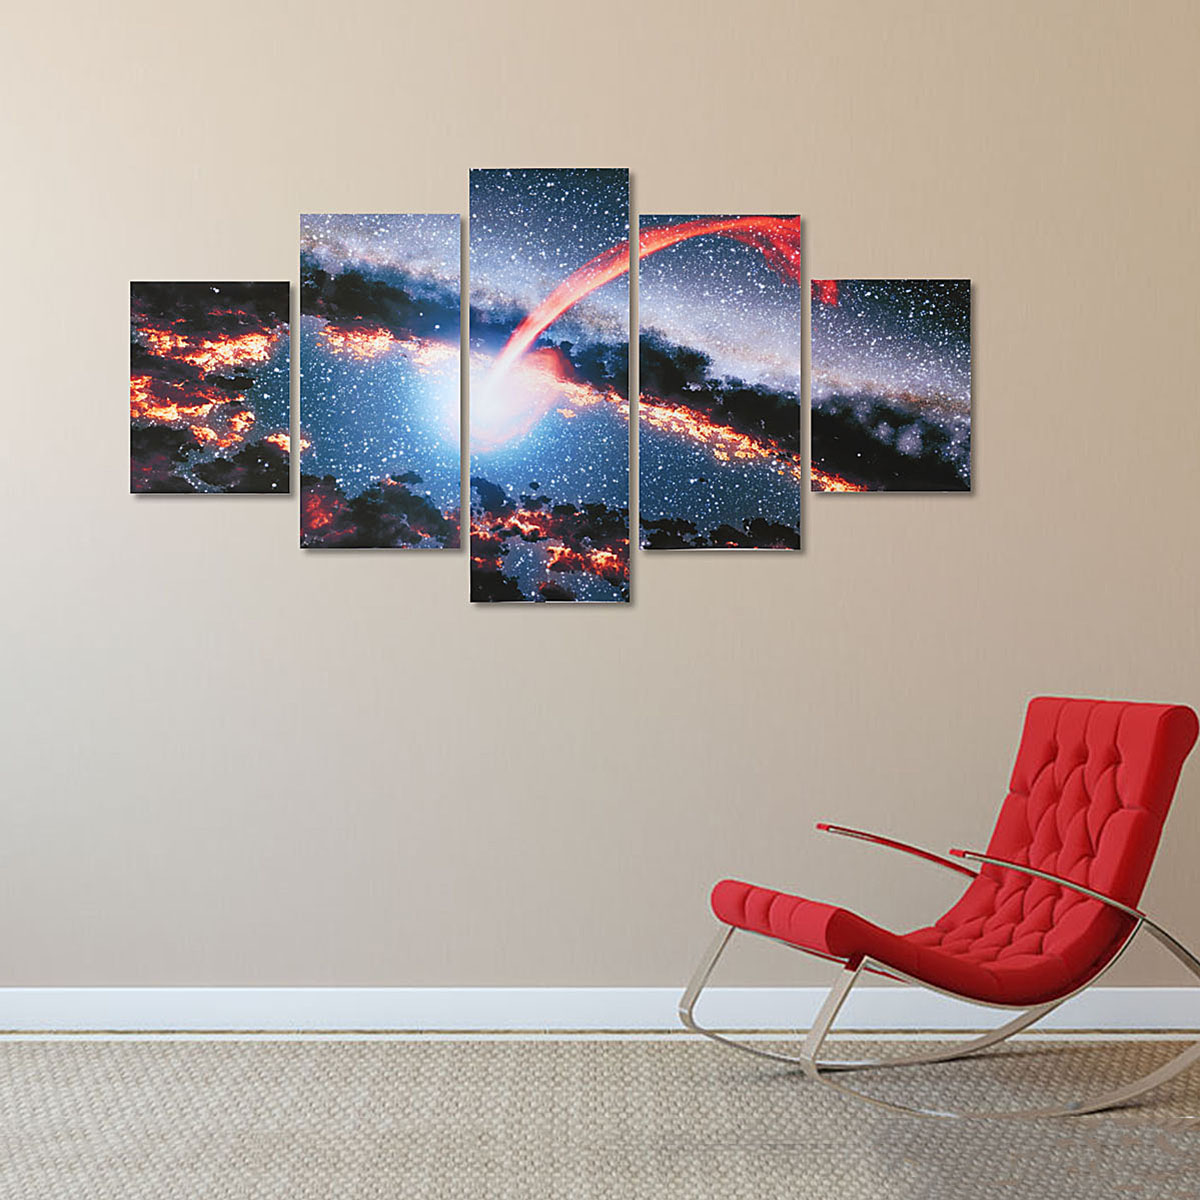 5Pcs-Canvas-Painting-Starry-Sky-Wall-Decorative-Print-Art-Pictures-Frameless-Wall-Hanging-Home-Offic-1803048-2